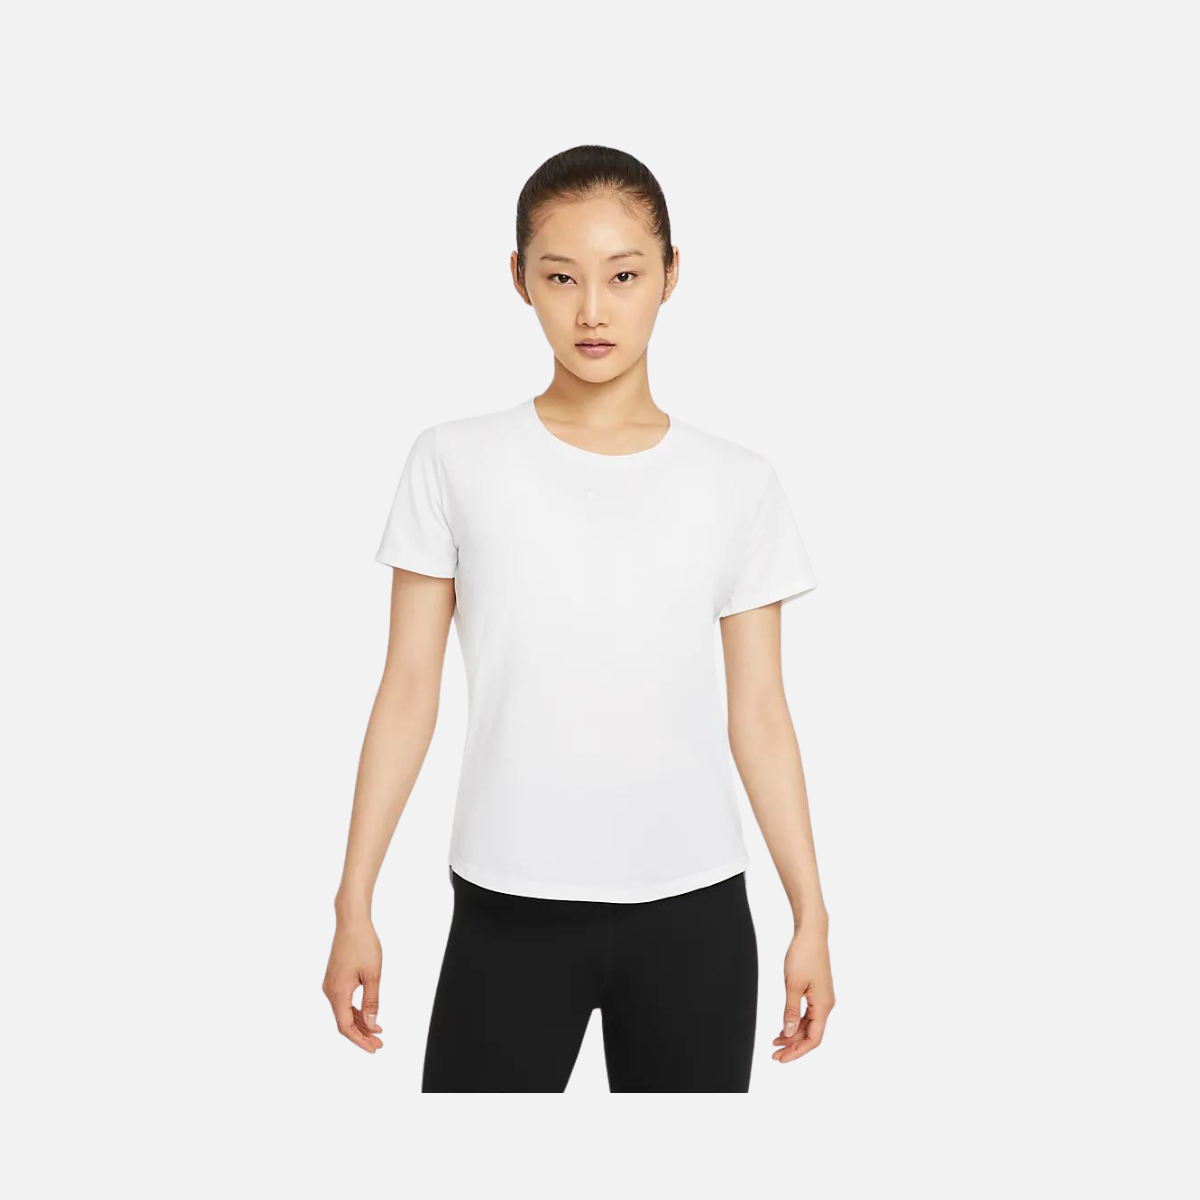 Nike Dri-Fit One Luxe Women's Standard Fit Short Sleeve Top -White